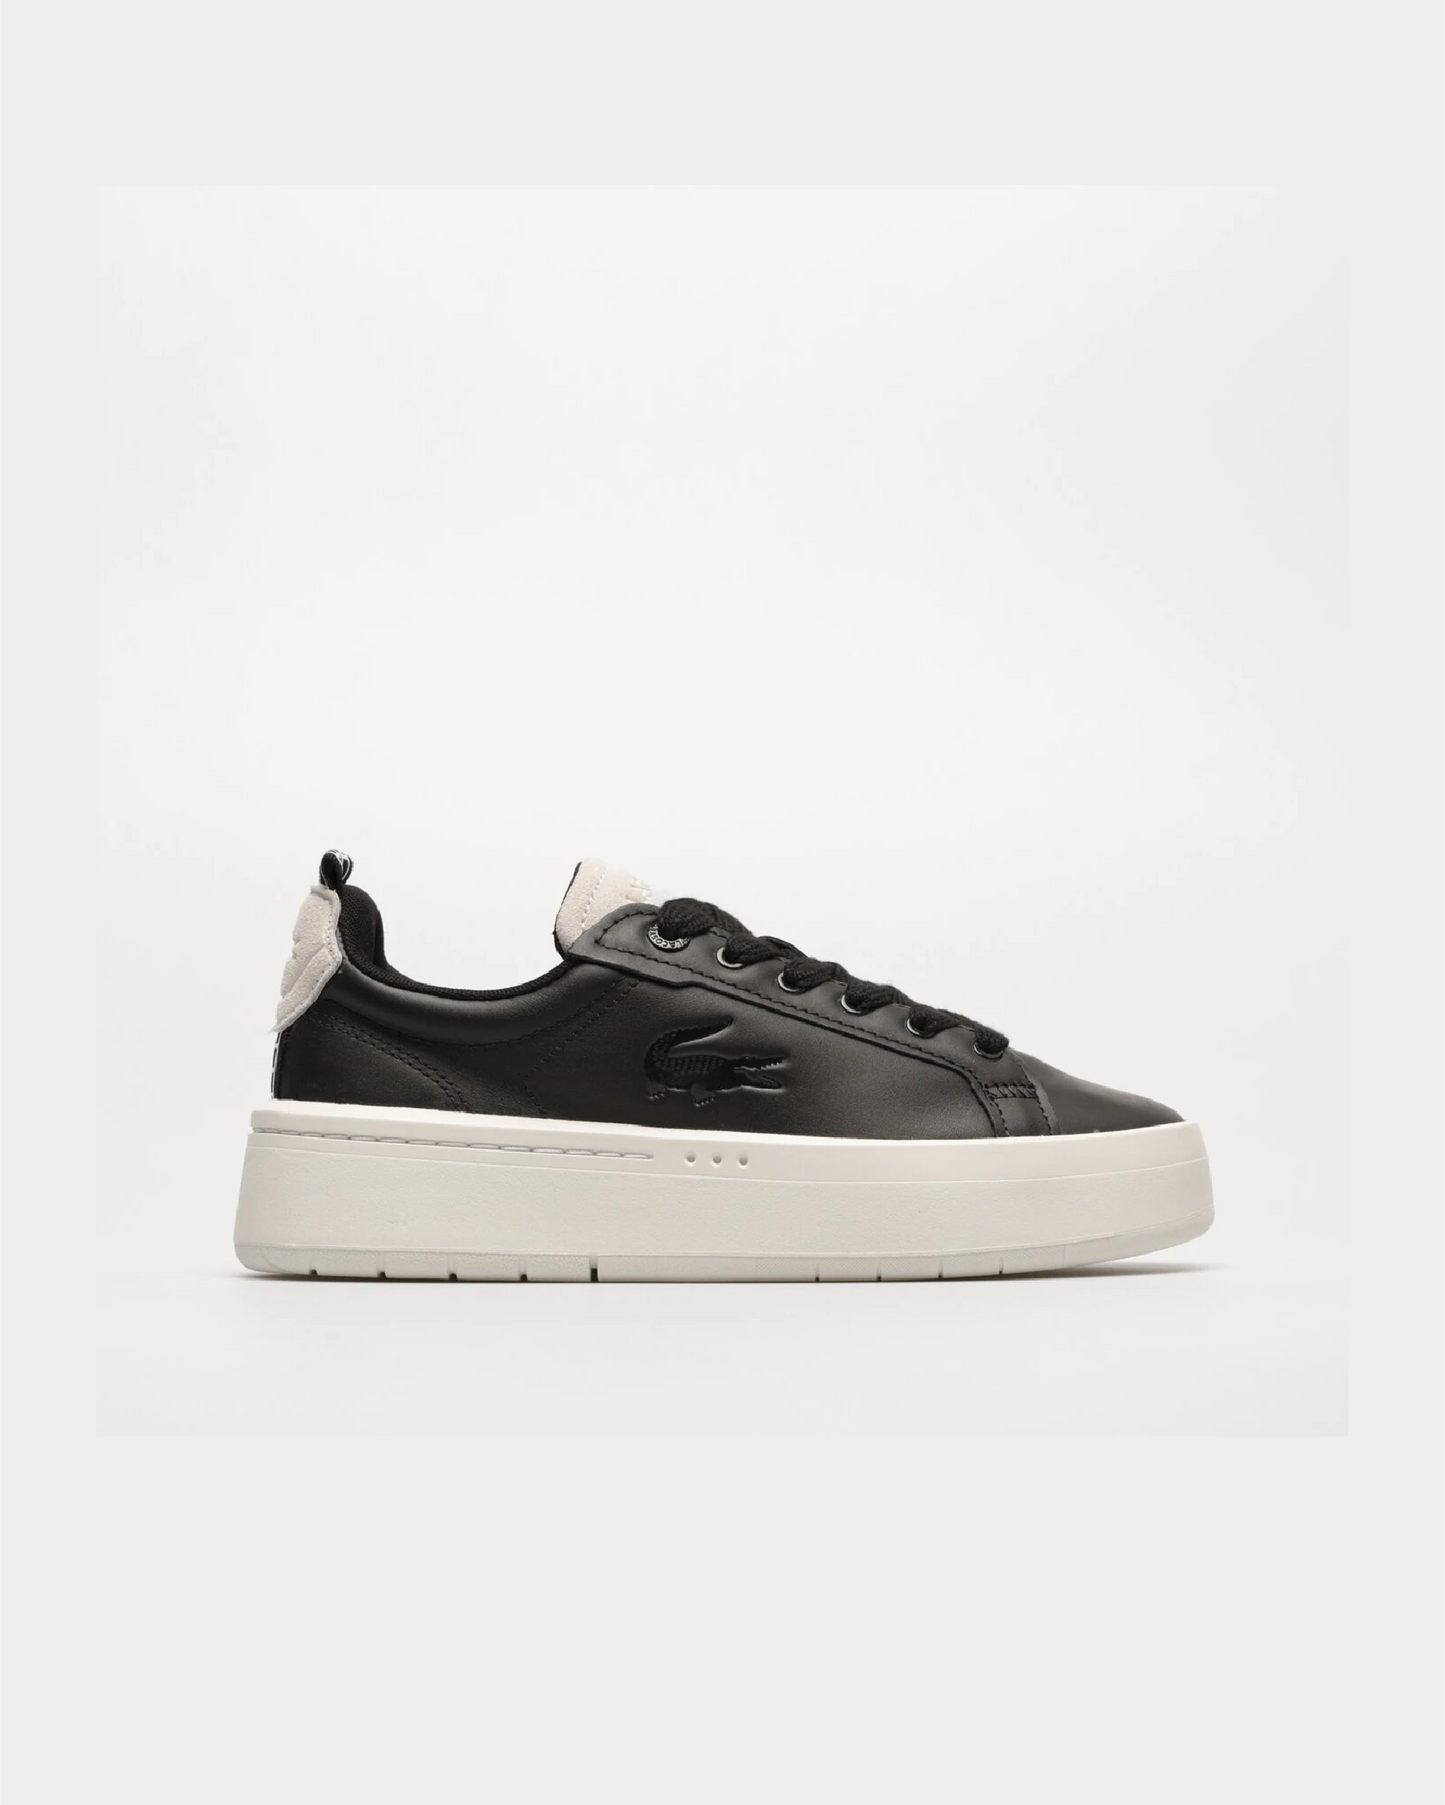 LACOSTE CARNABY PLAT 123 1 SFA - BLK/OFF WHT